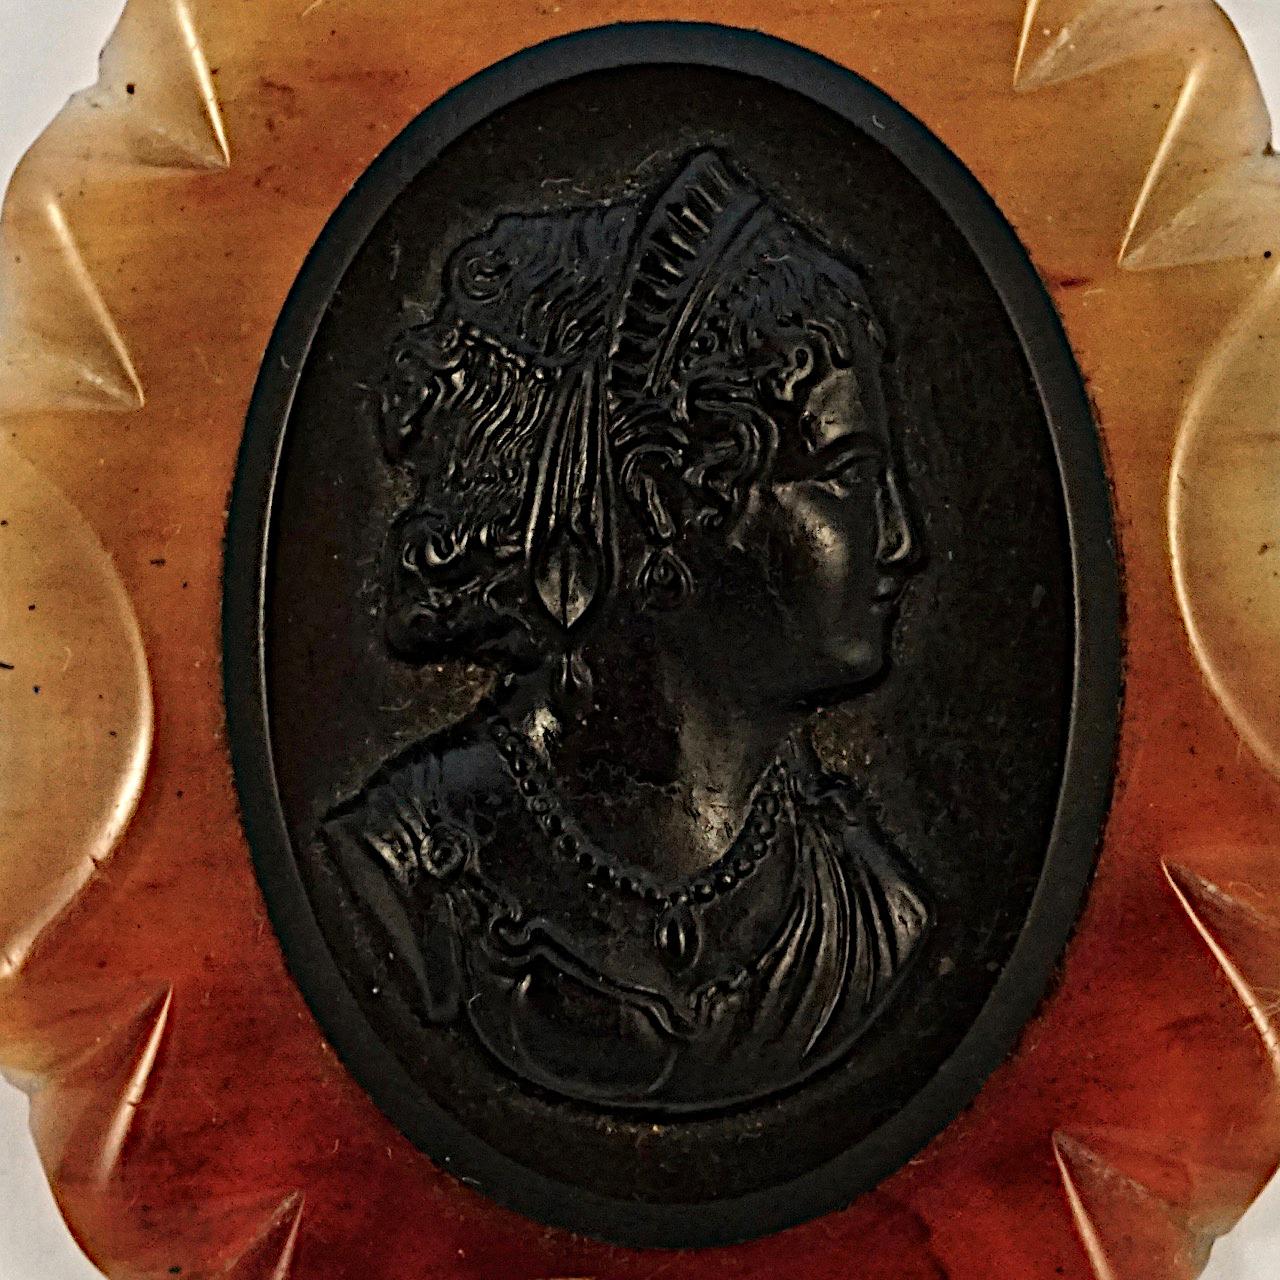 Beautiful large oval black and amber early plastic cameo brooch. Measuring 7 cm / 2.75 inches by 5.5 cm / 2.1 inches. There is scratching as expected and wear to the back. The fastening has some rust.

This wonderful statement cameo brooch is circa